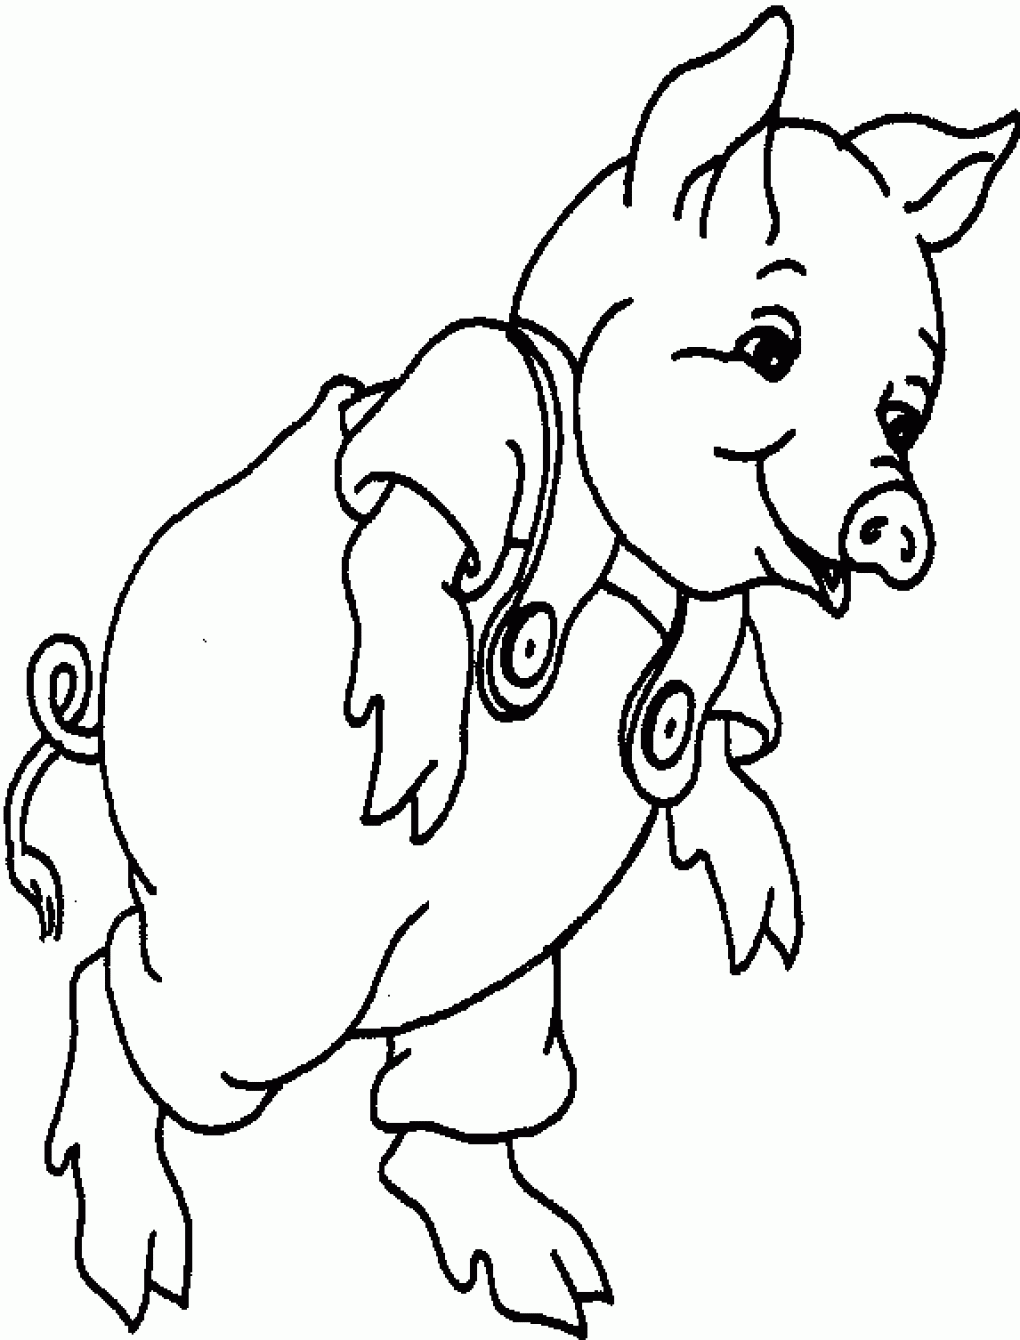 images of pigs to color fun for kids coloring sites free download of to pigs color images 